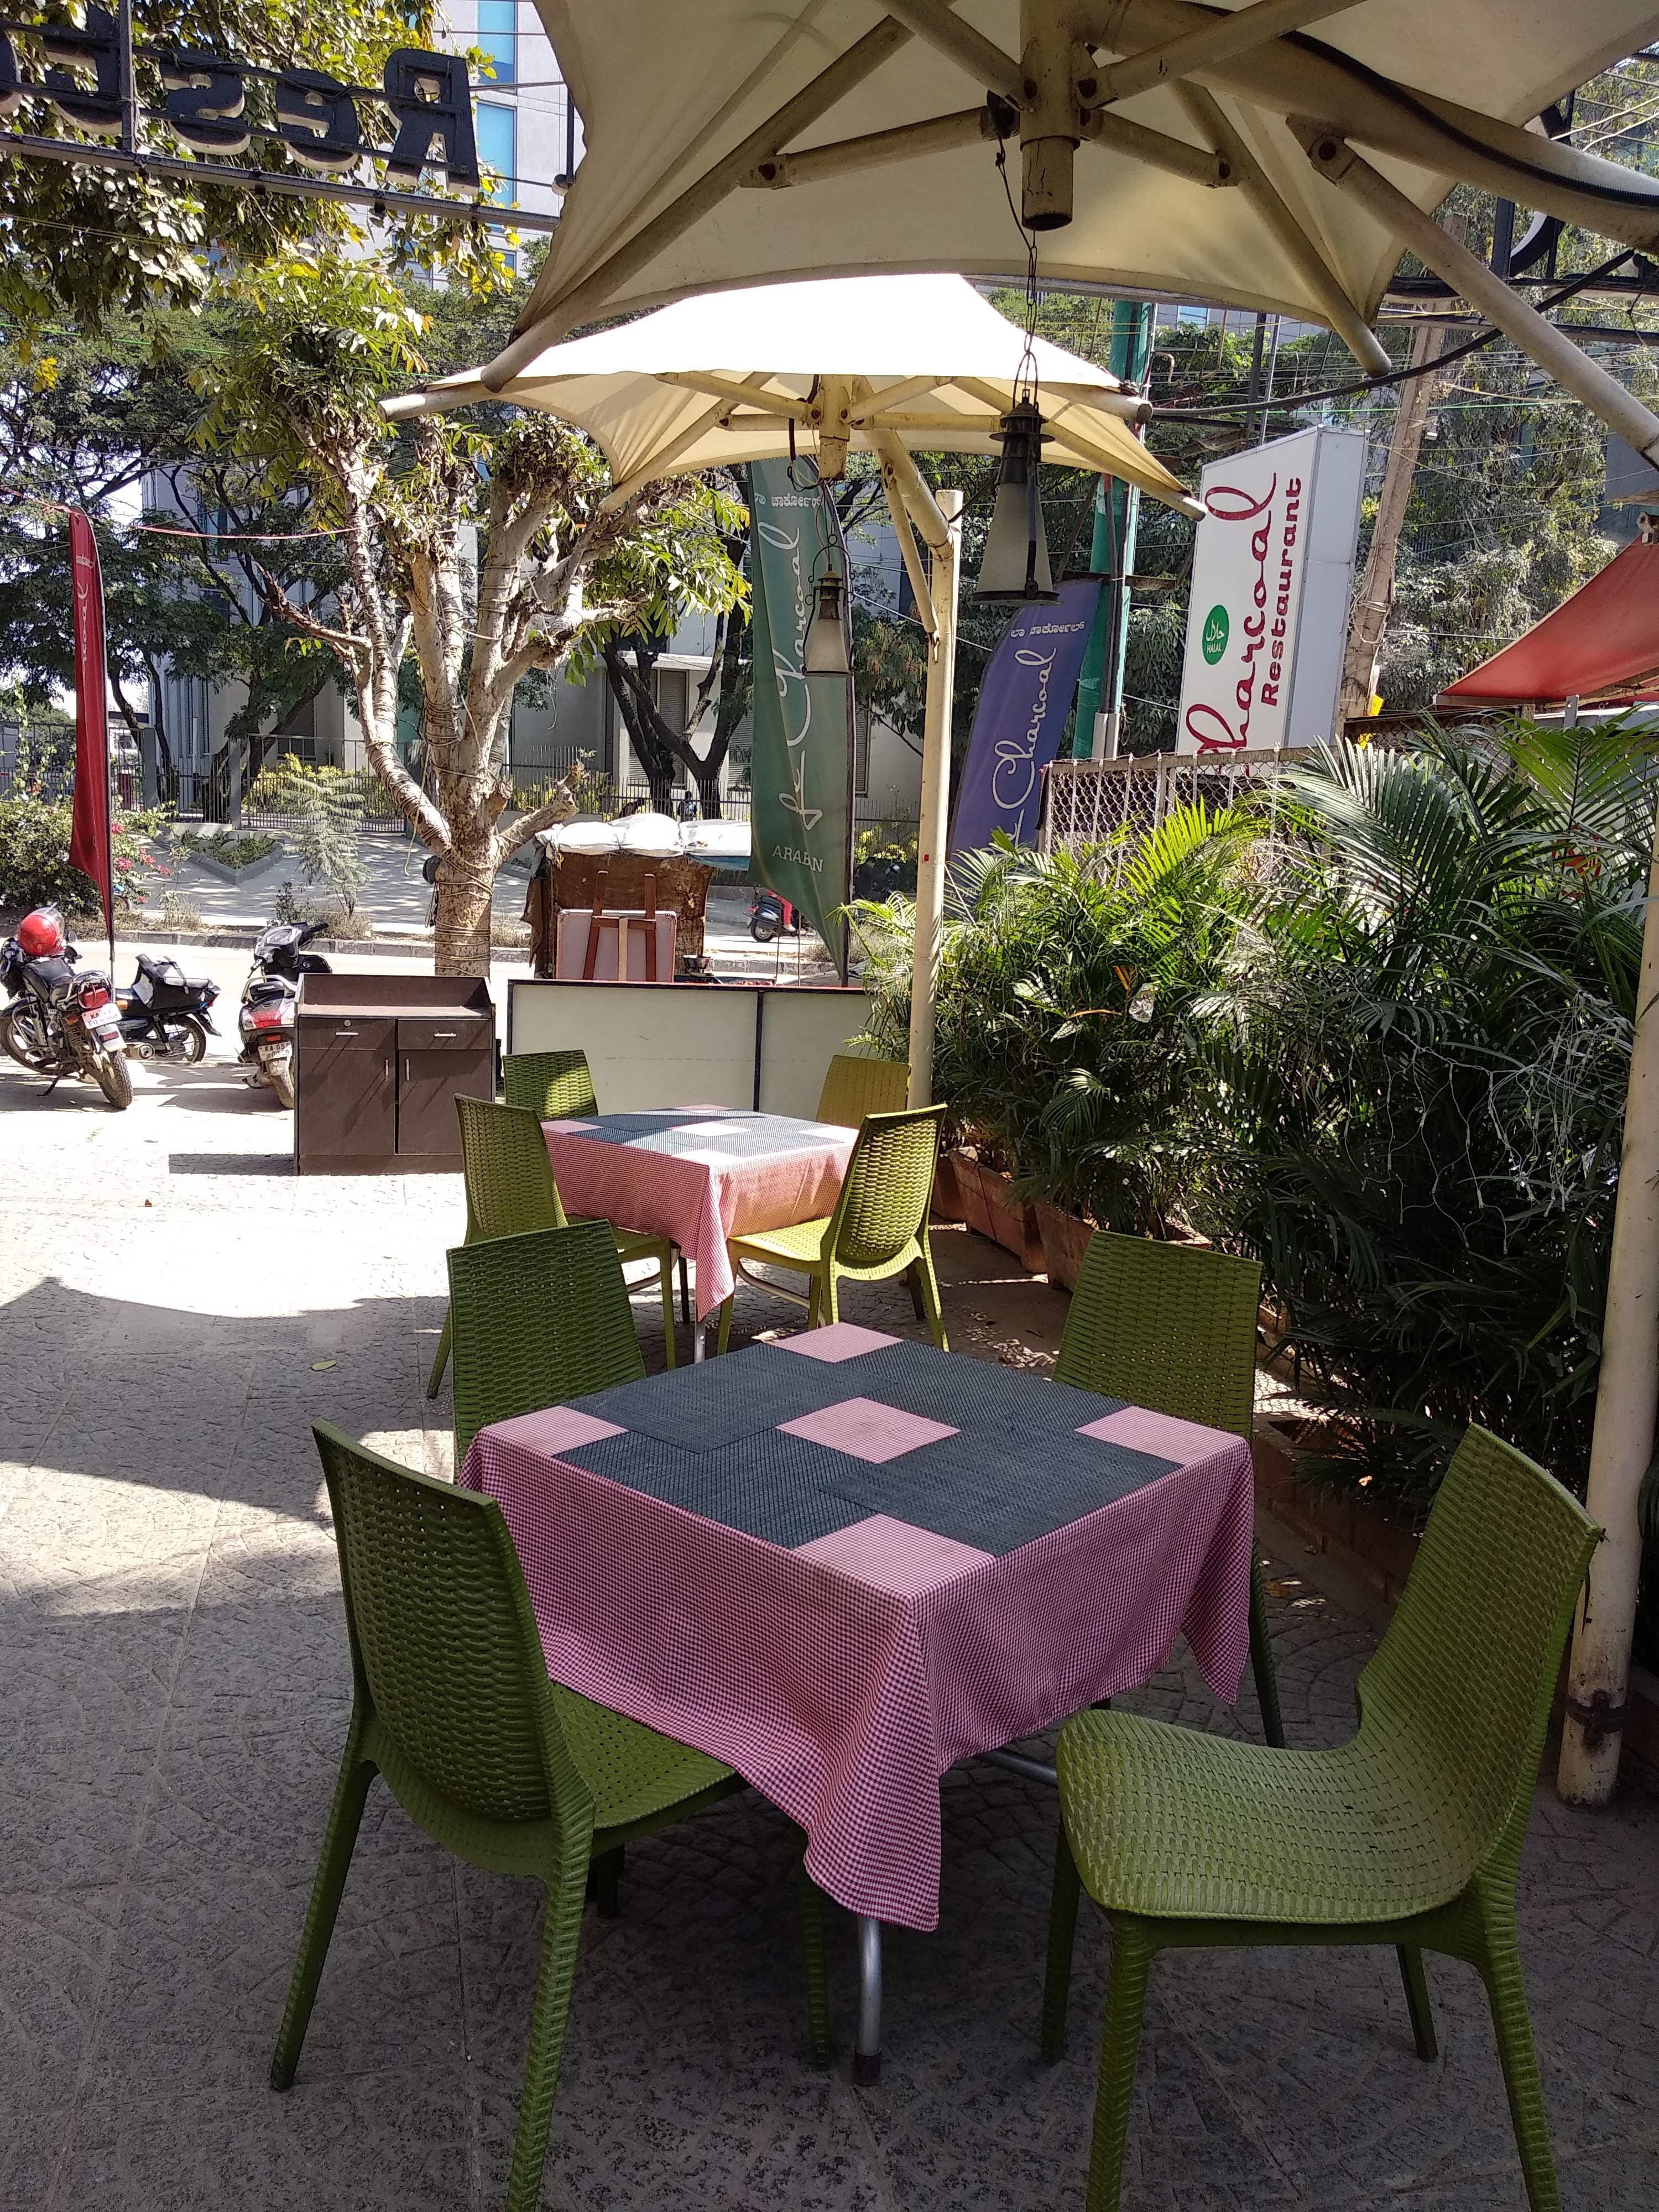 Restaurant,Table,Property,Outdoor table,Furniture,Patio,Building,Tree,Chair,Tablecloth